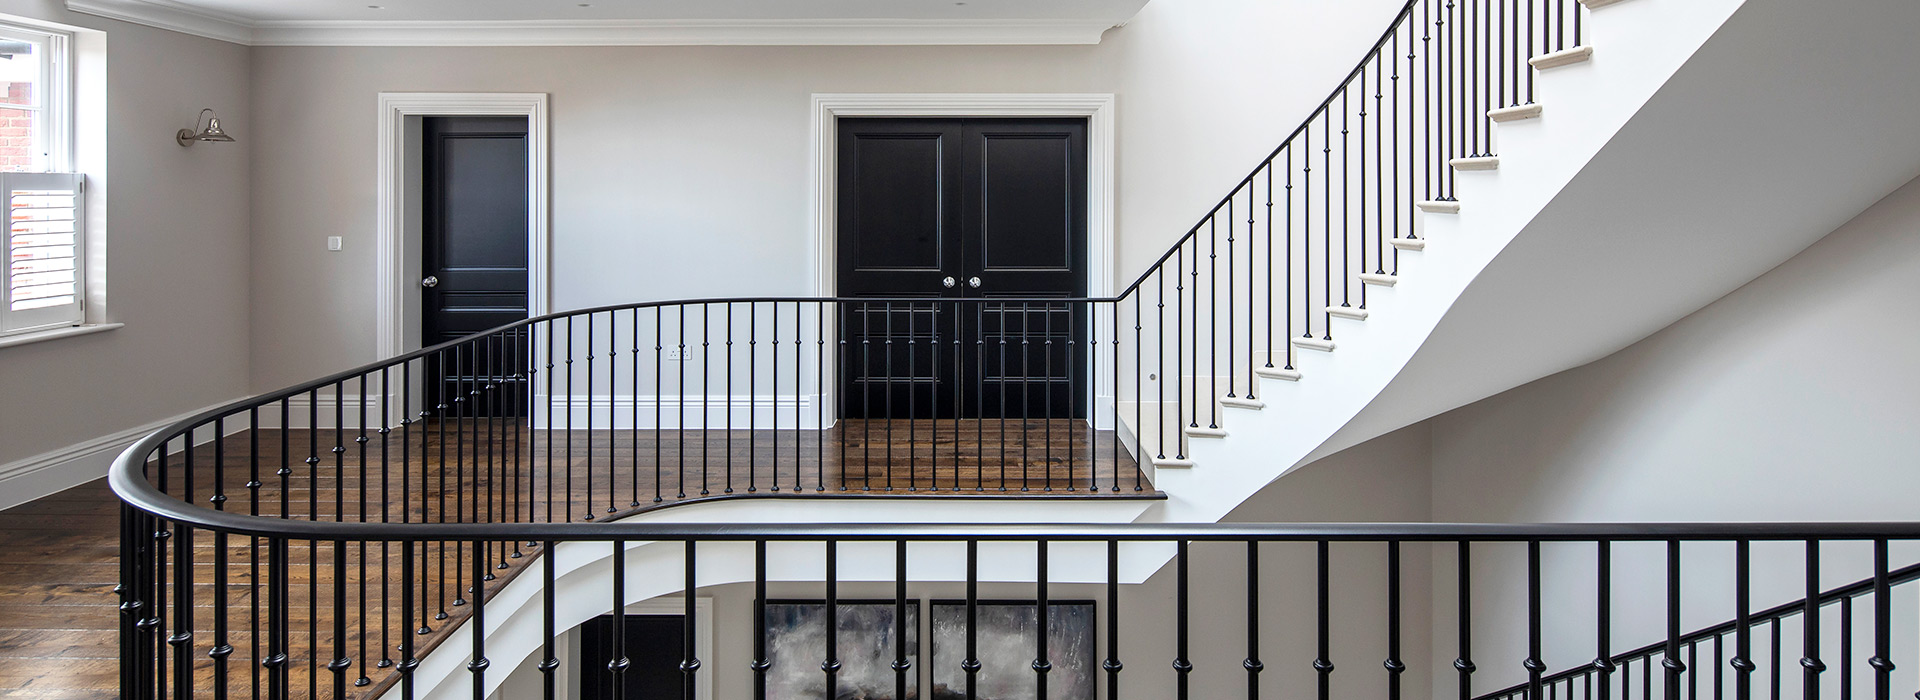 Wrought iron staircase with Knightsbridge interior doors